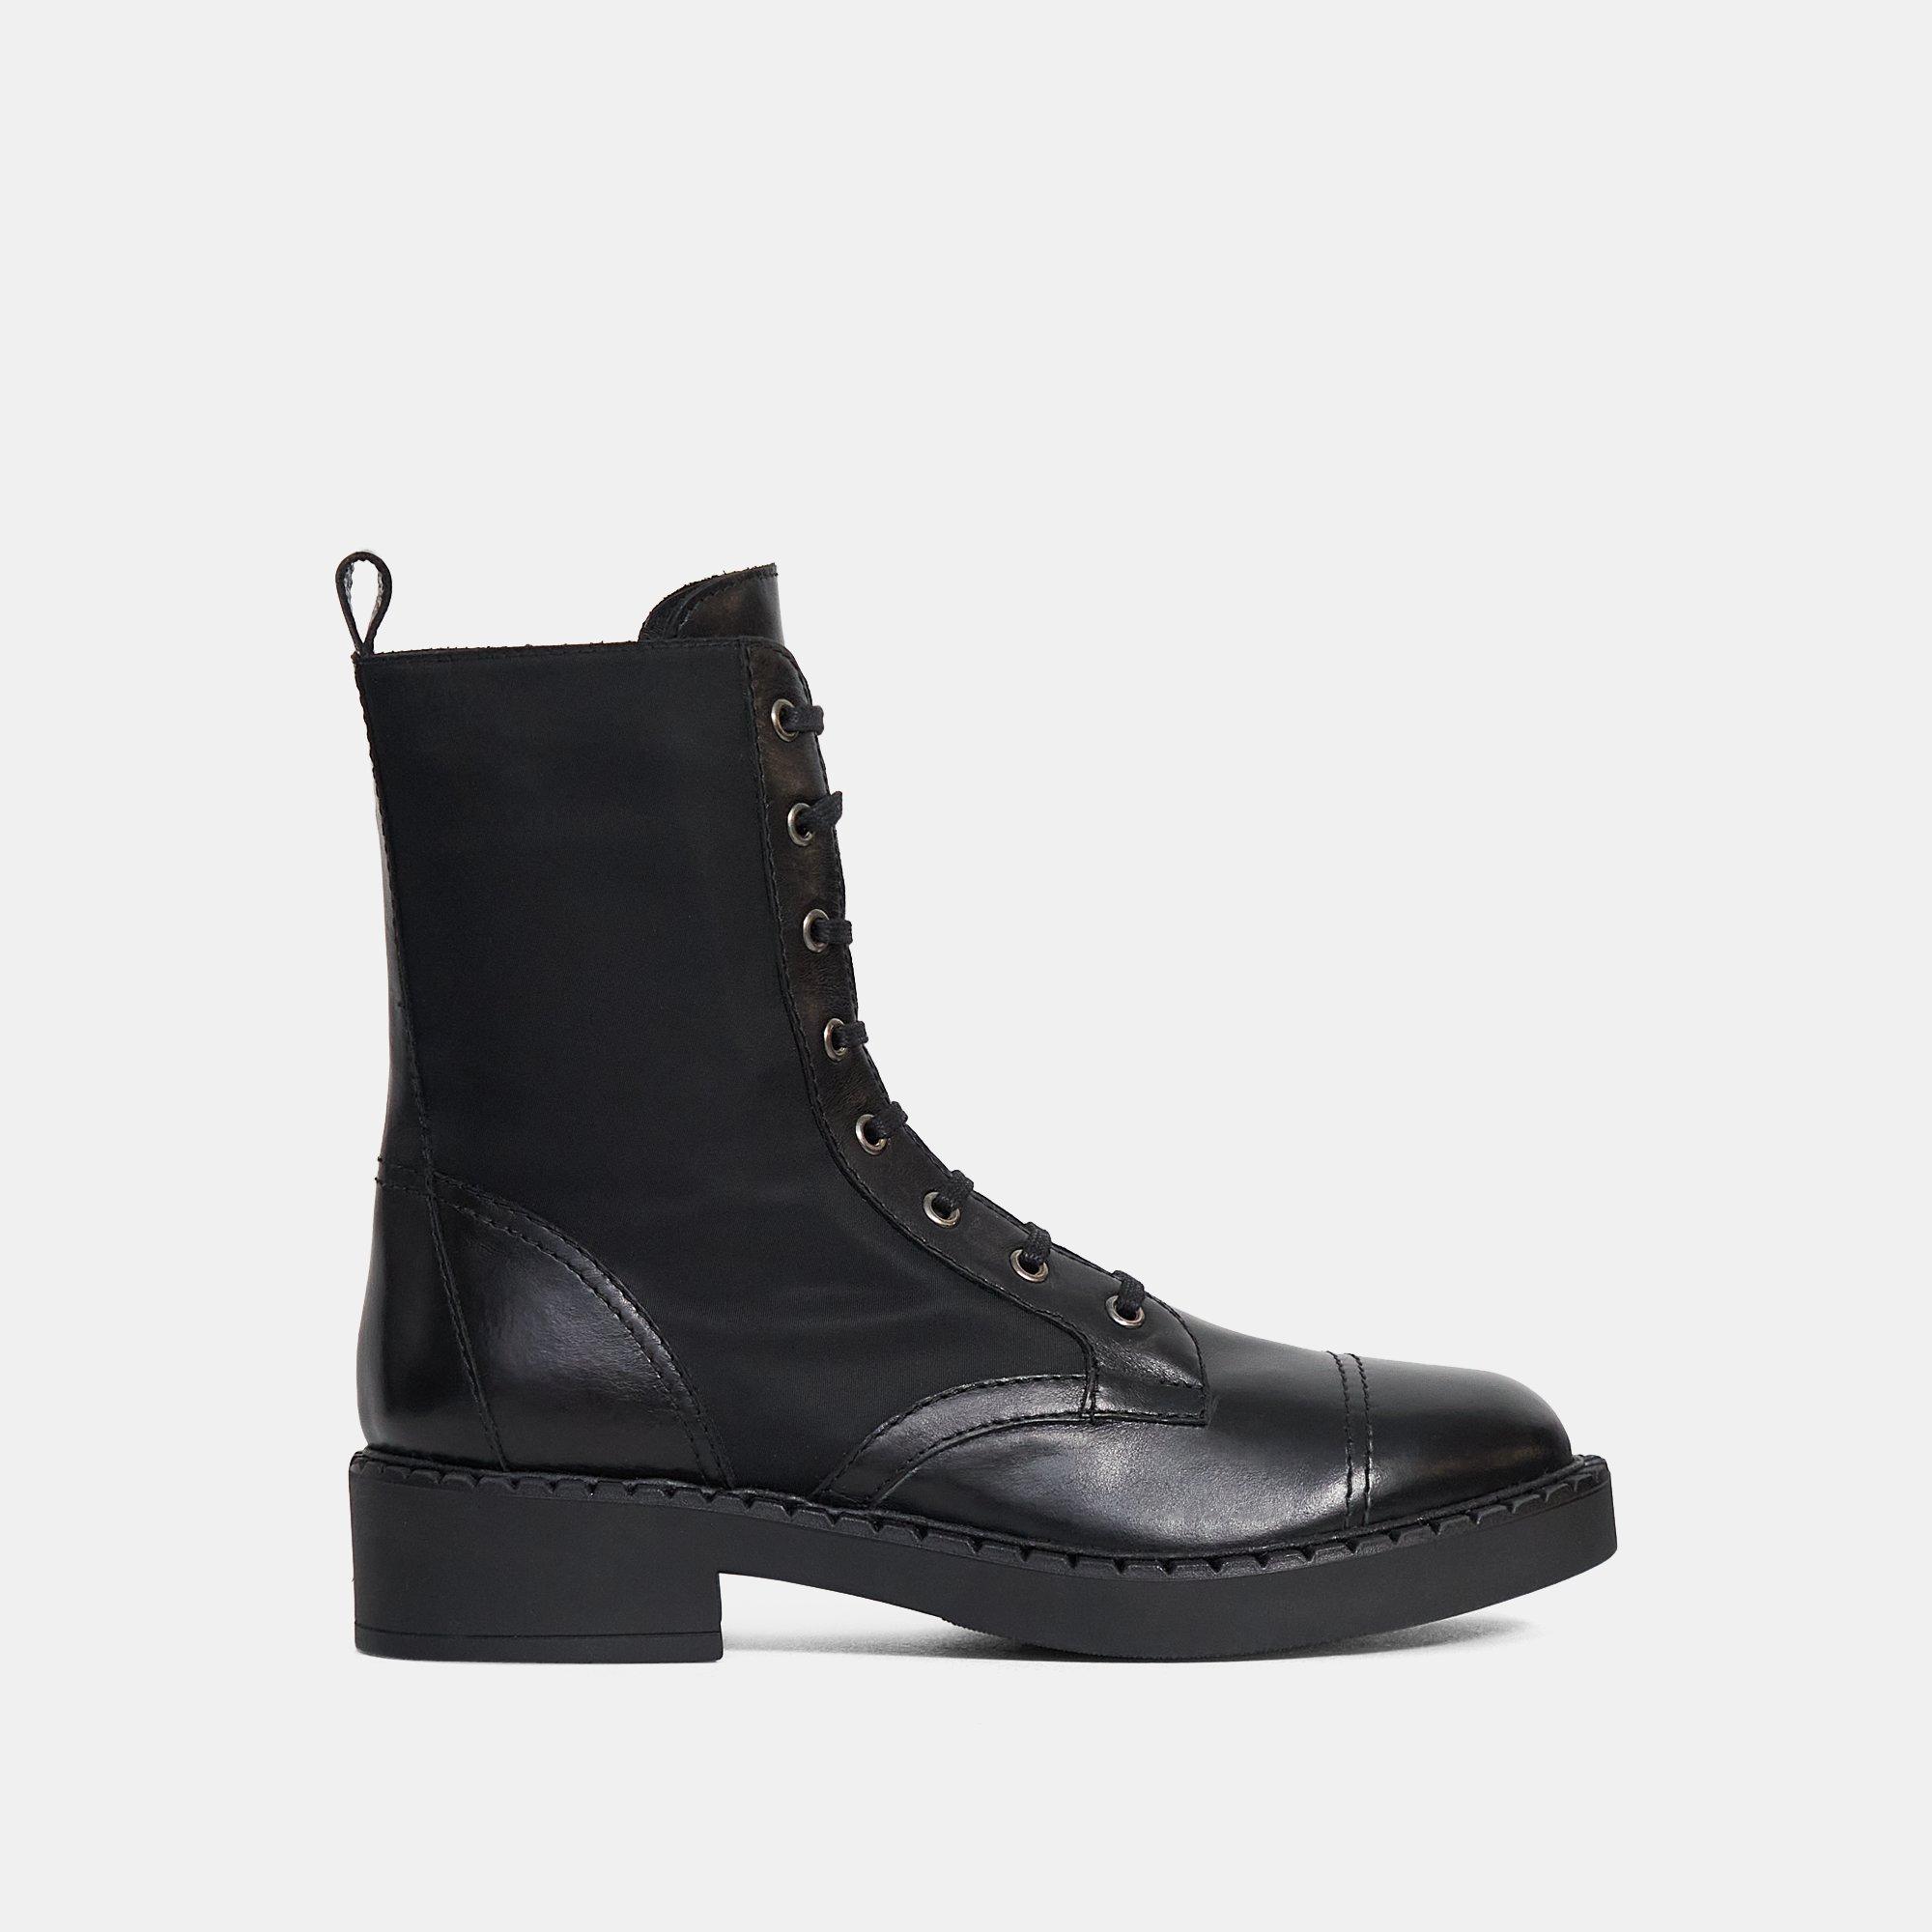 Theory Laced Boot in Nylon